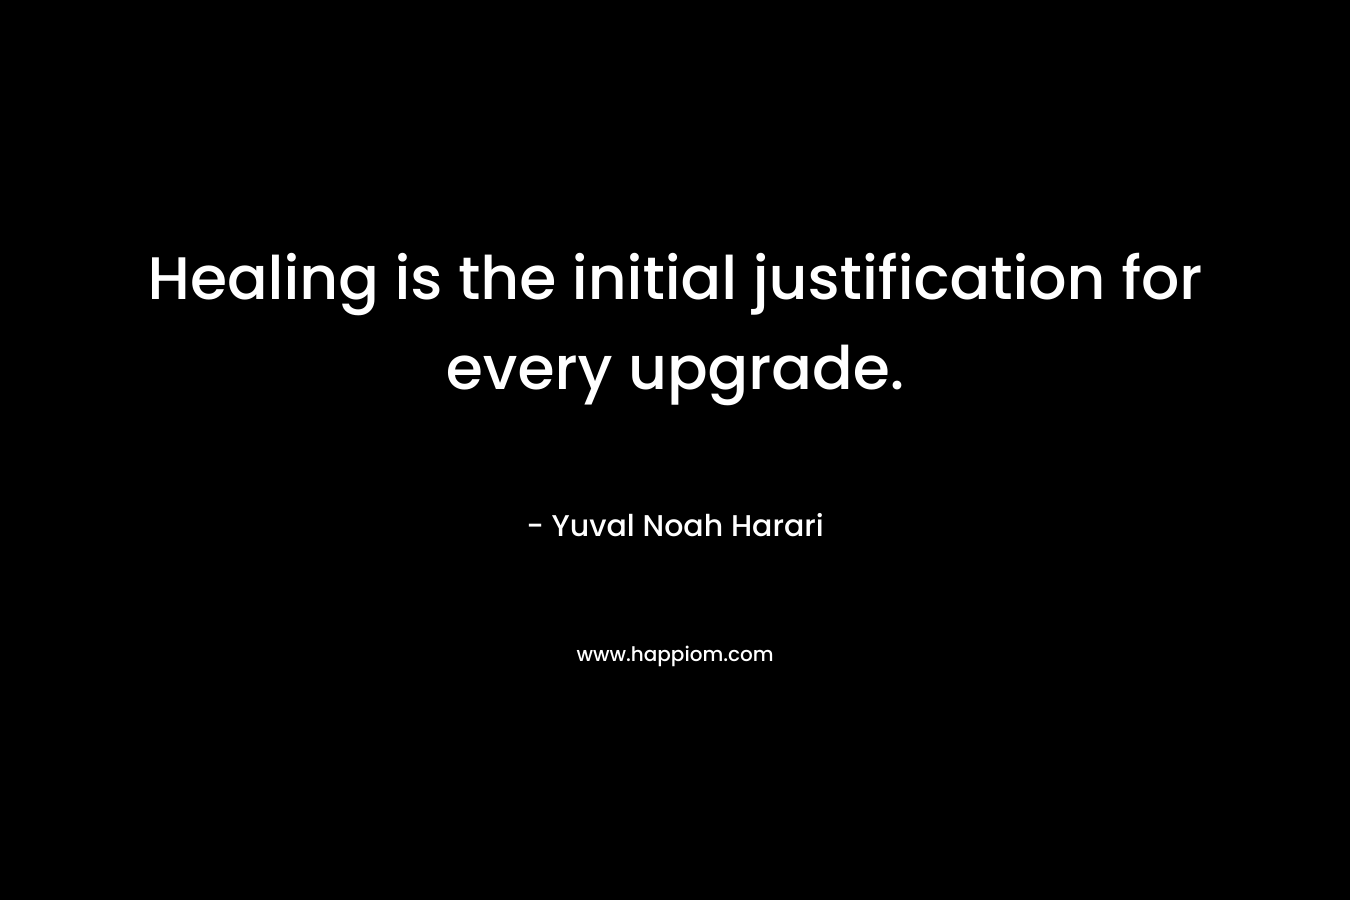 Healing is the initial justification for every upgrade.